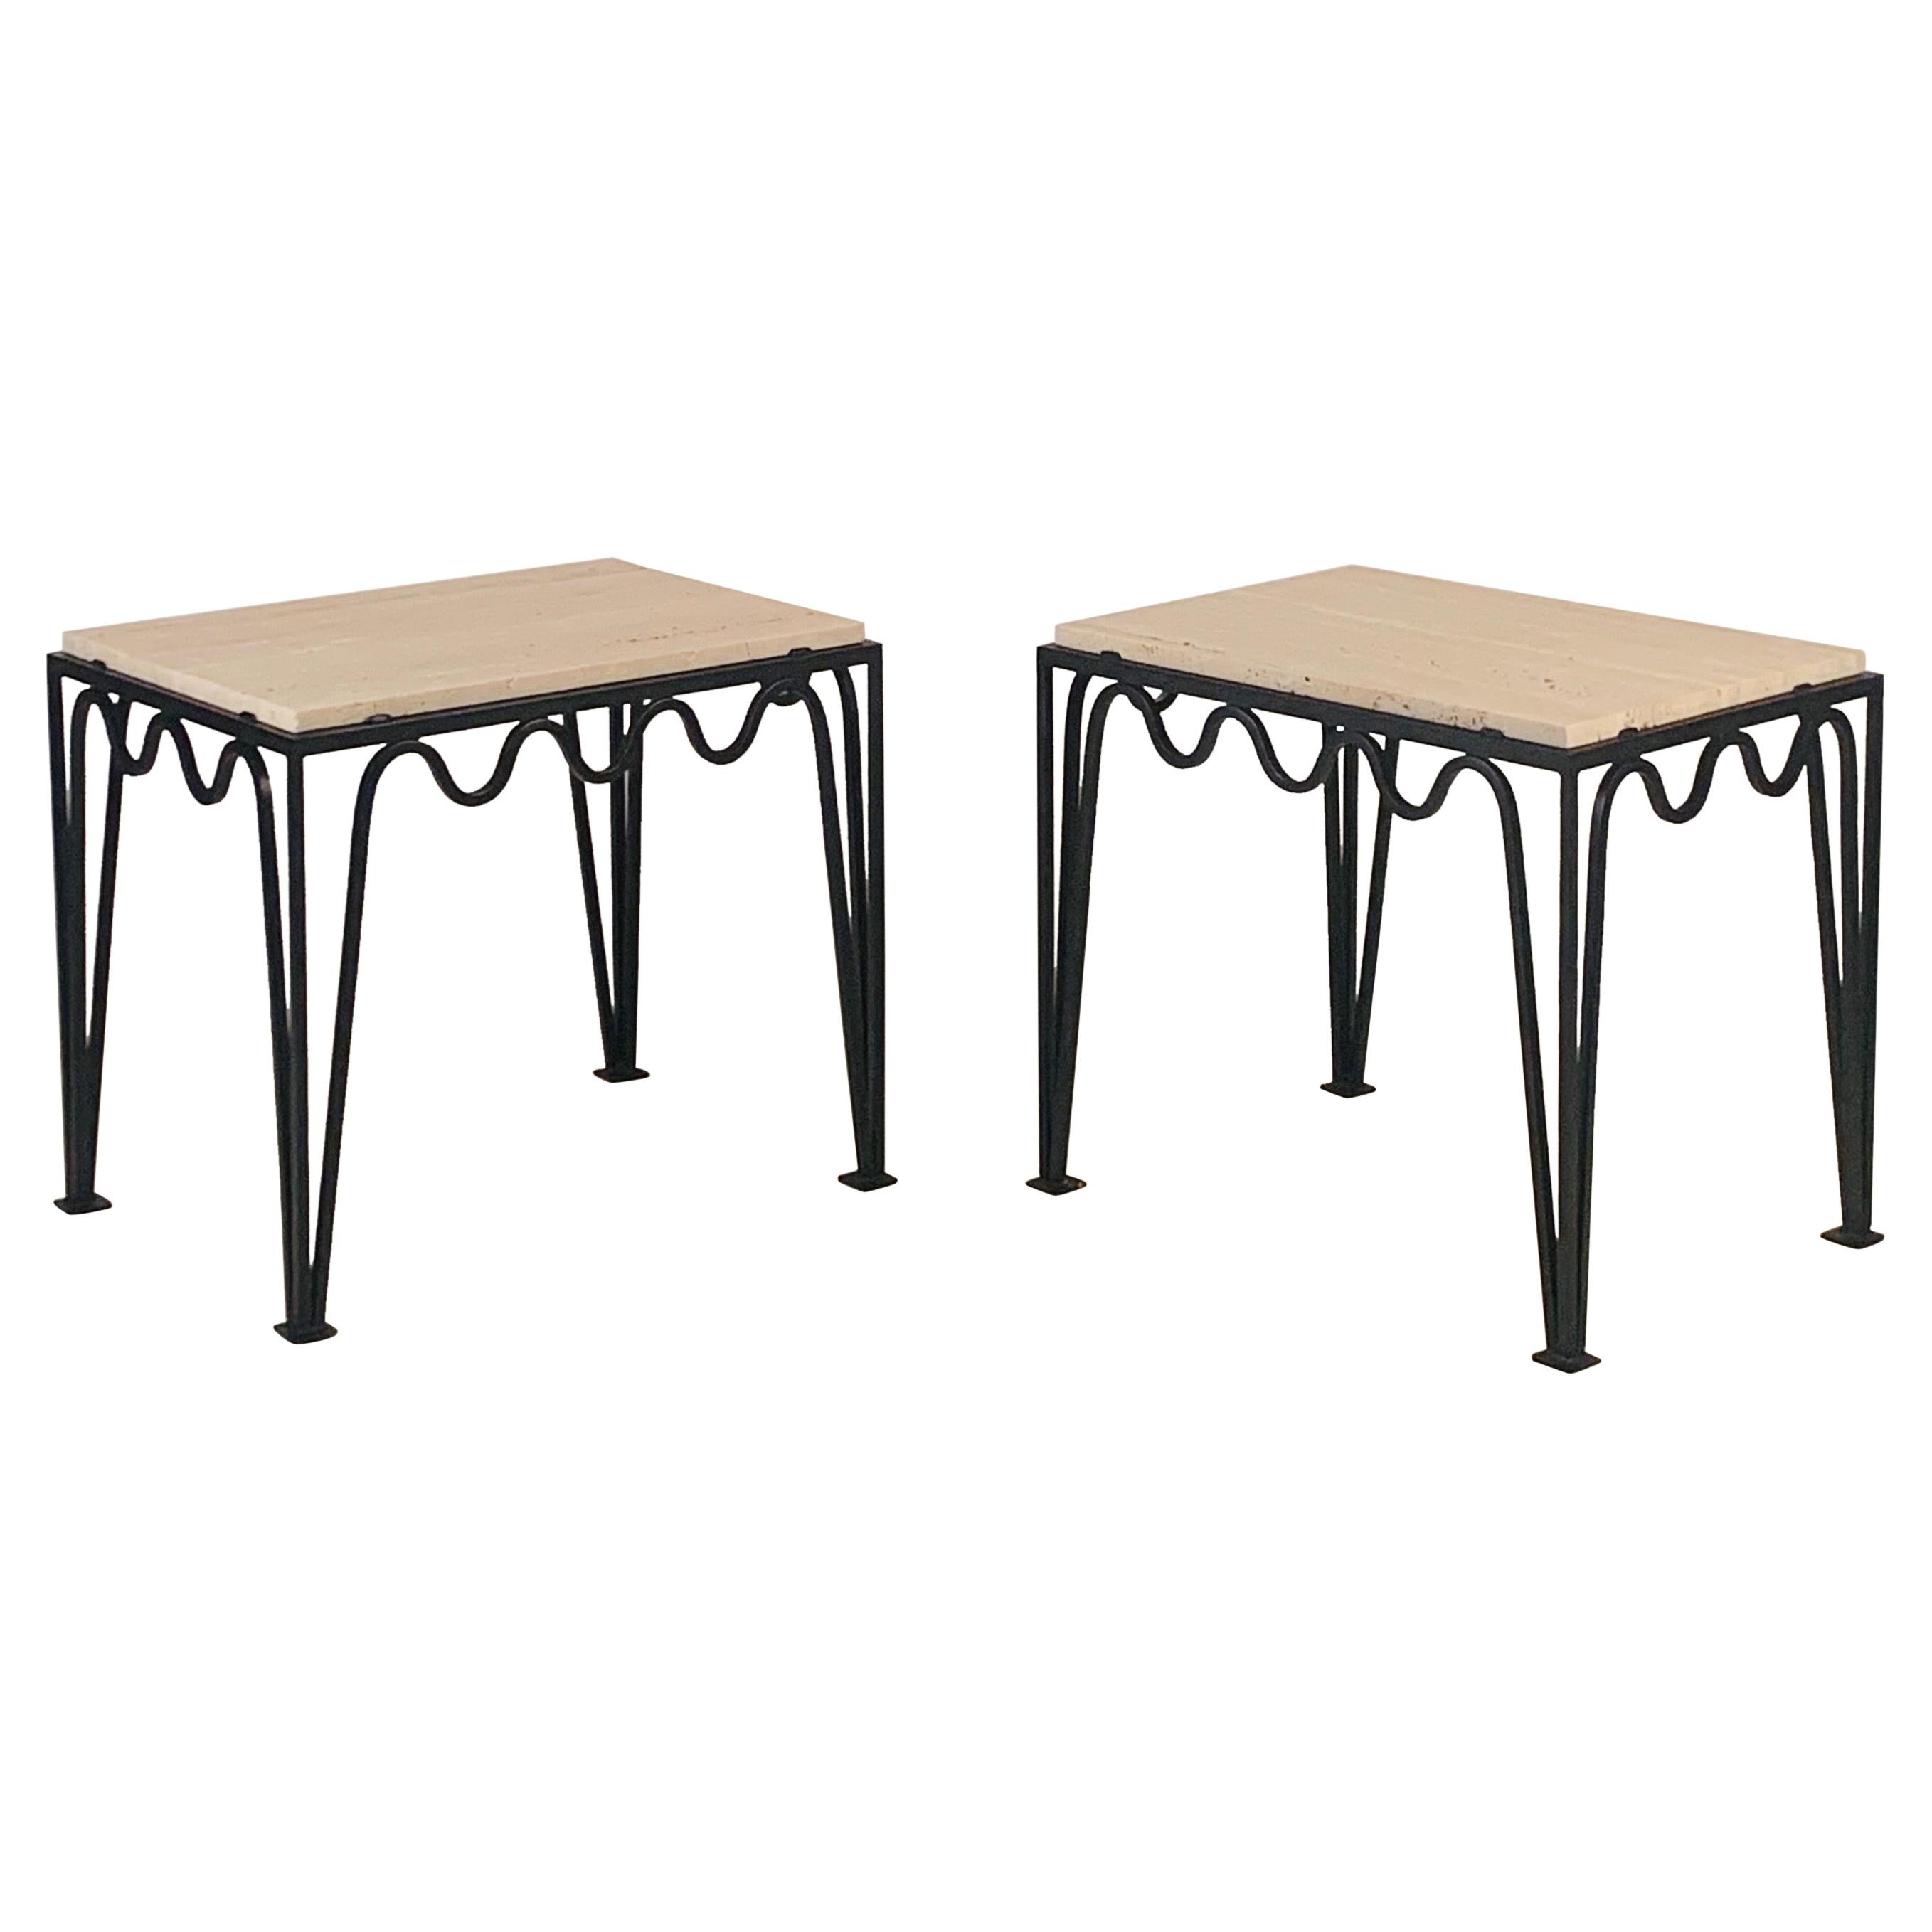 Pair of Large Grooved Travertine Meandre Side Tables by Design Frères